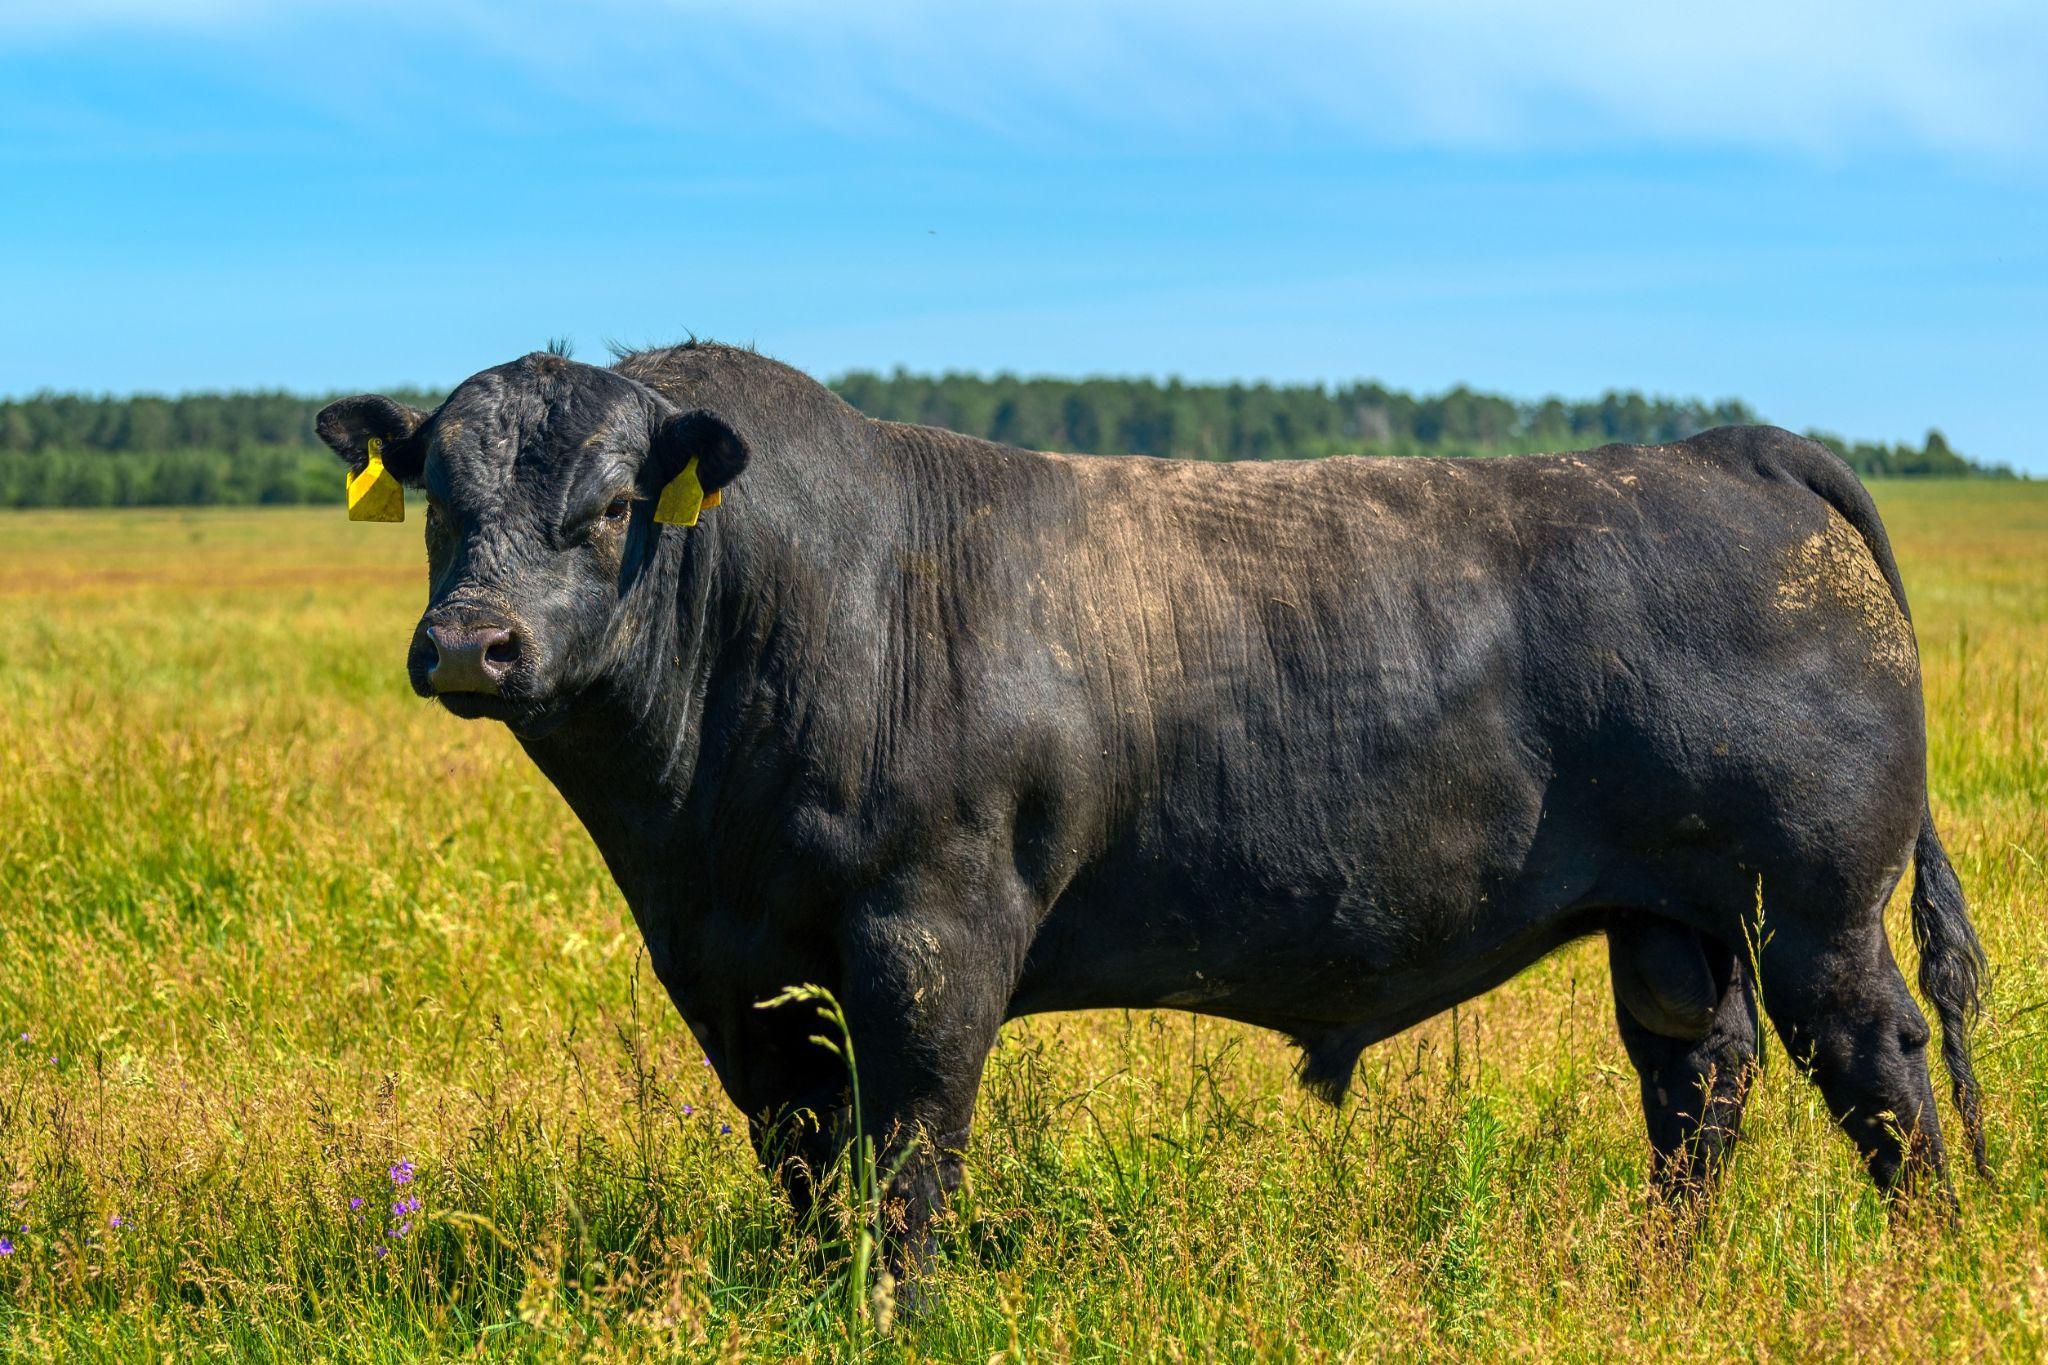 A black Angus bull stands on a green grassy field.